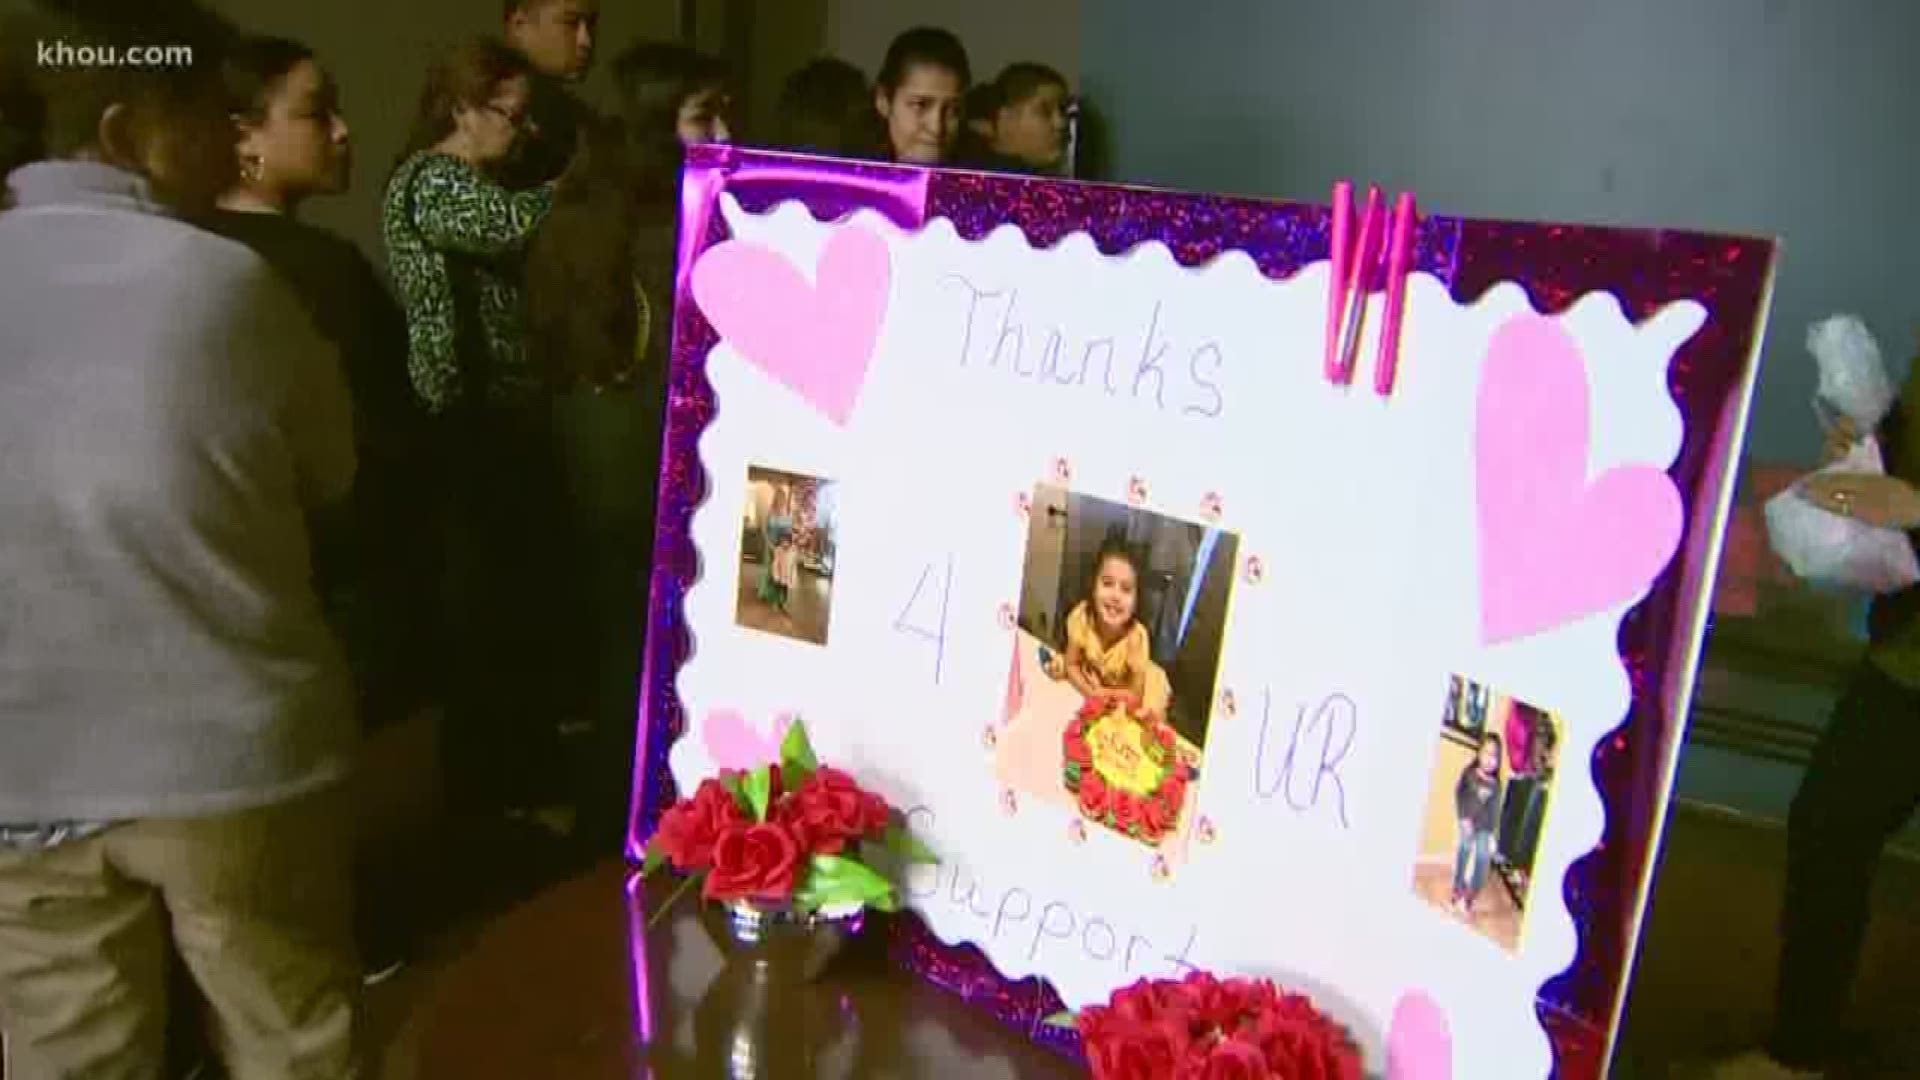 Houston's east side community raises money for the funeral of a little girl killed in a suspected drunk driving crash last month.